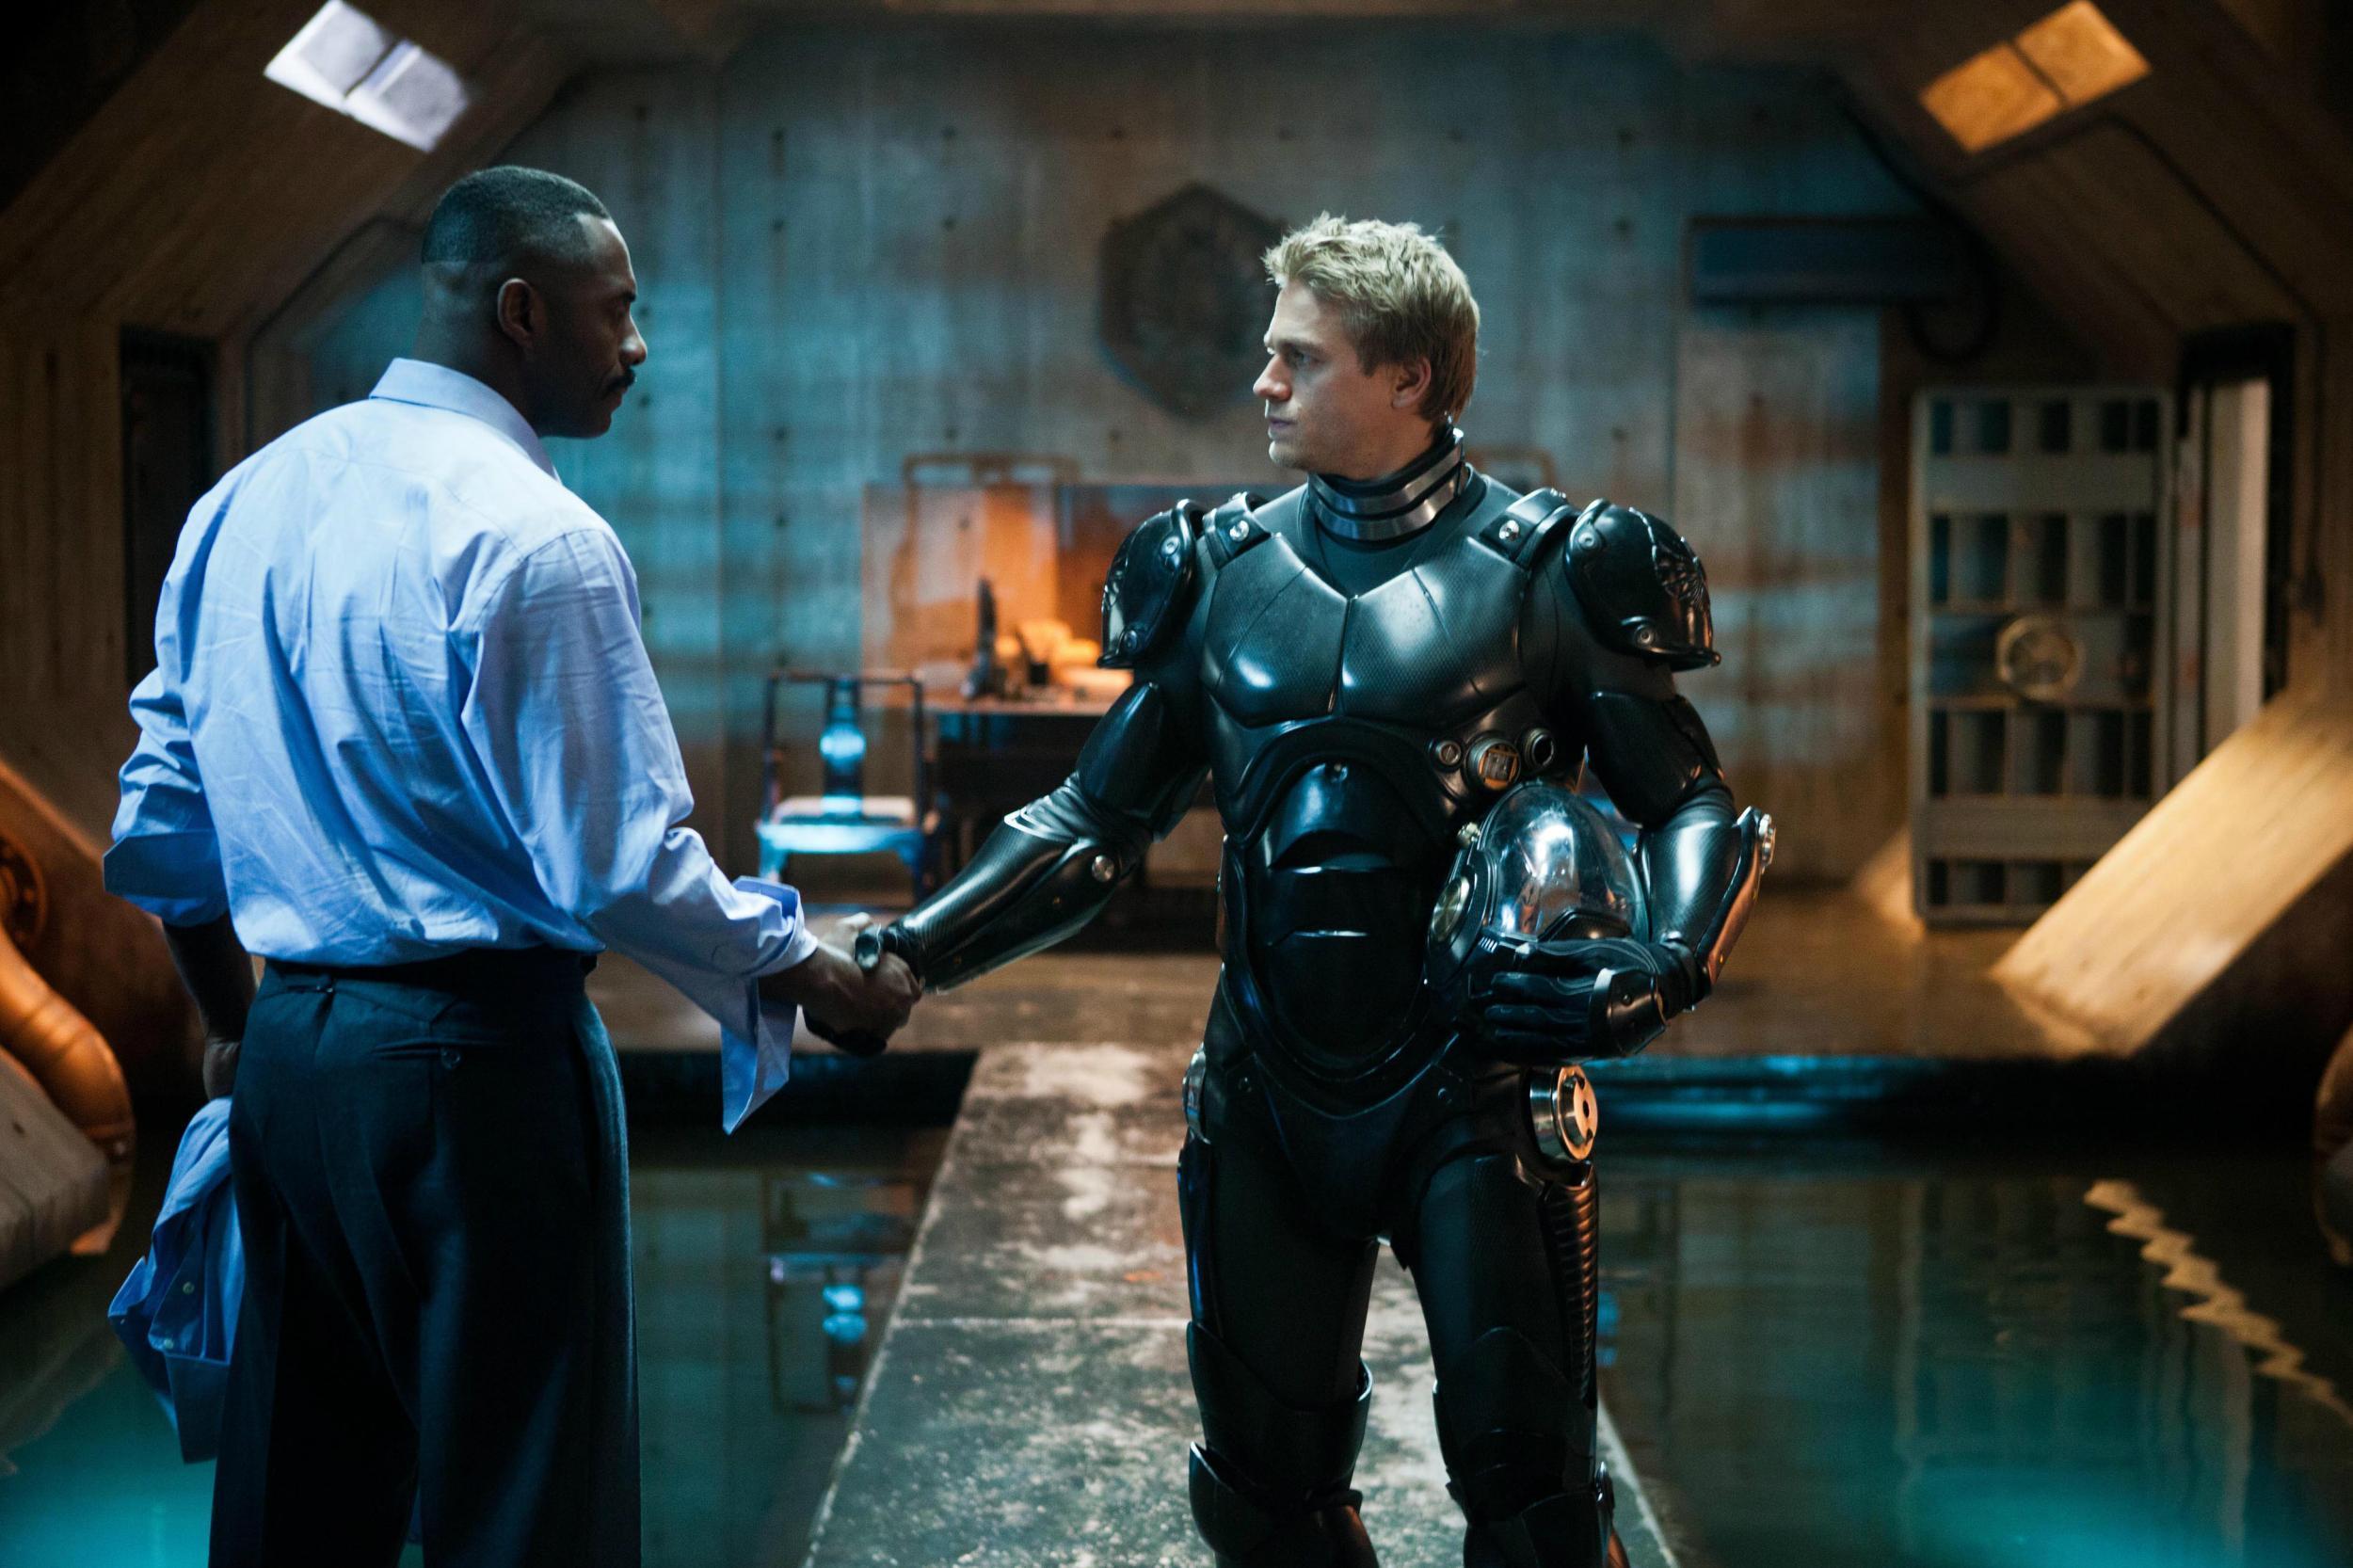 Idris Elba and Charlie Hunnam as General Stacker Pentecost and Raleigh Becket in the first film in the series